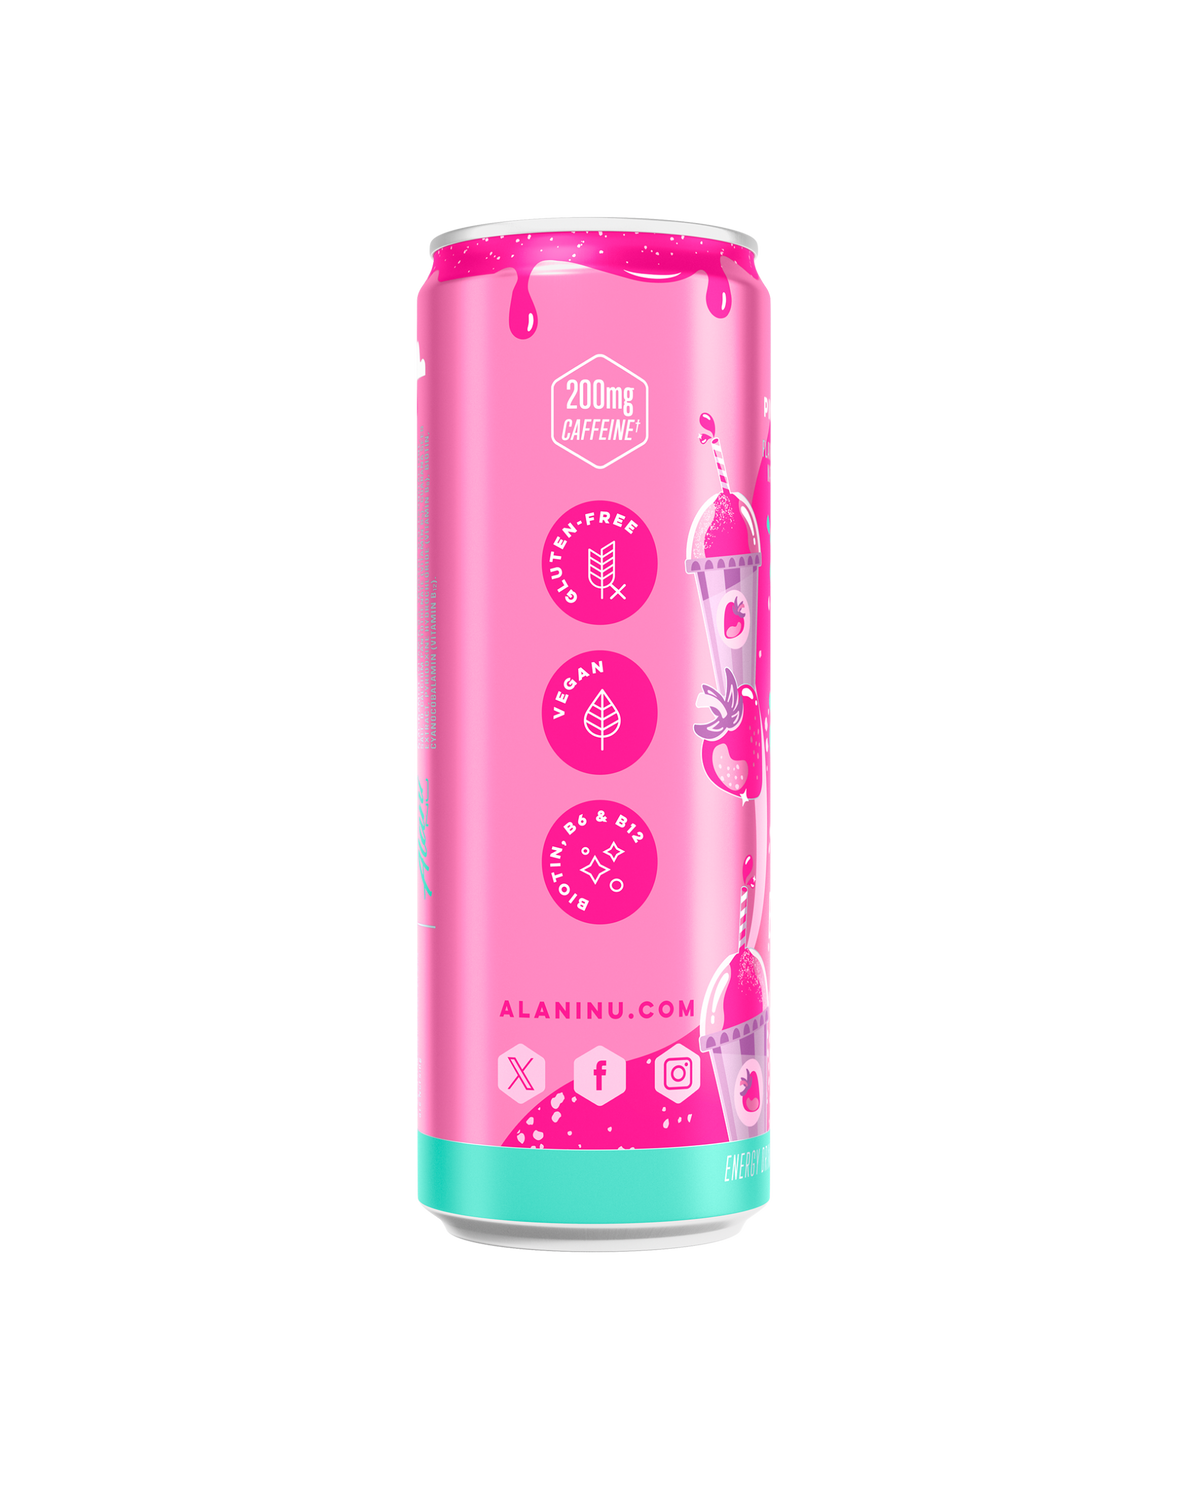 The side view of an Alani Nu Pink Slush Energy Drink can showing stacked vertical badges: 200mg caffeine, gluten-free, vegan, biotin, B6 &amp; B12. At the bottom, AlaniNu.com sits above 3 social media icons. 